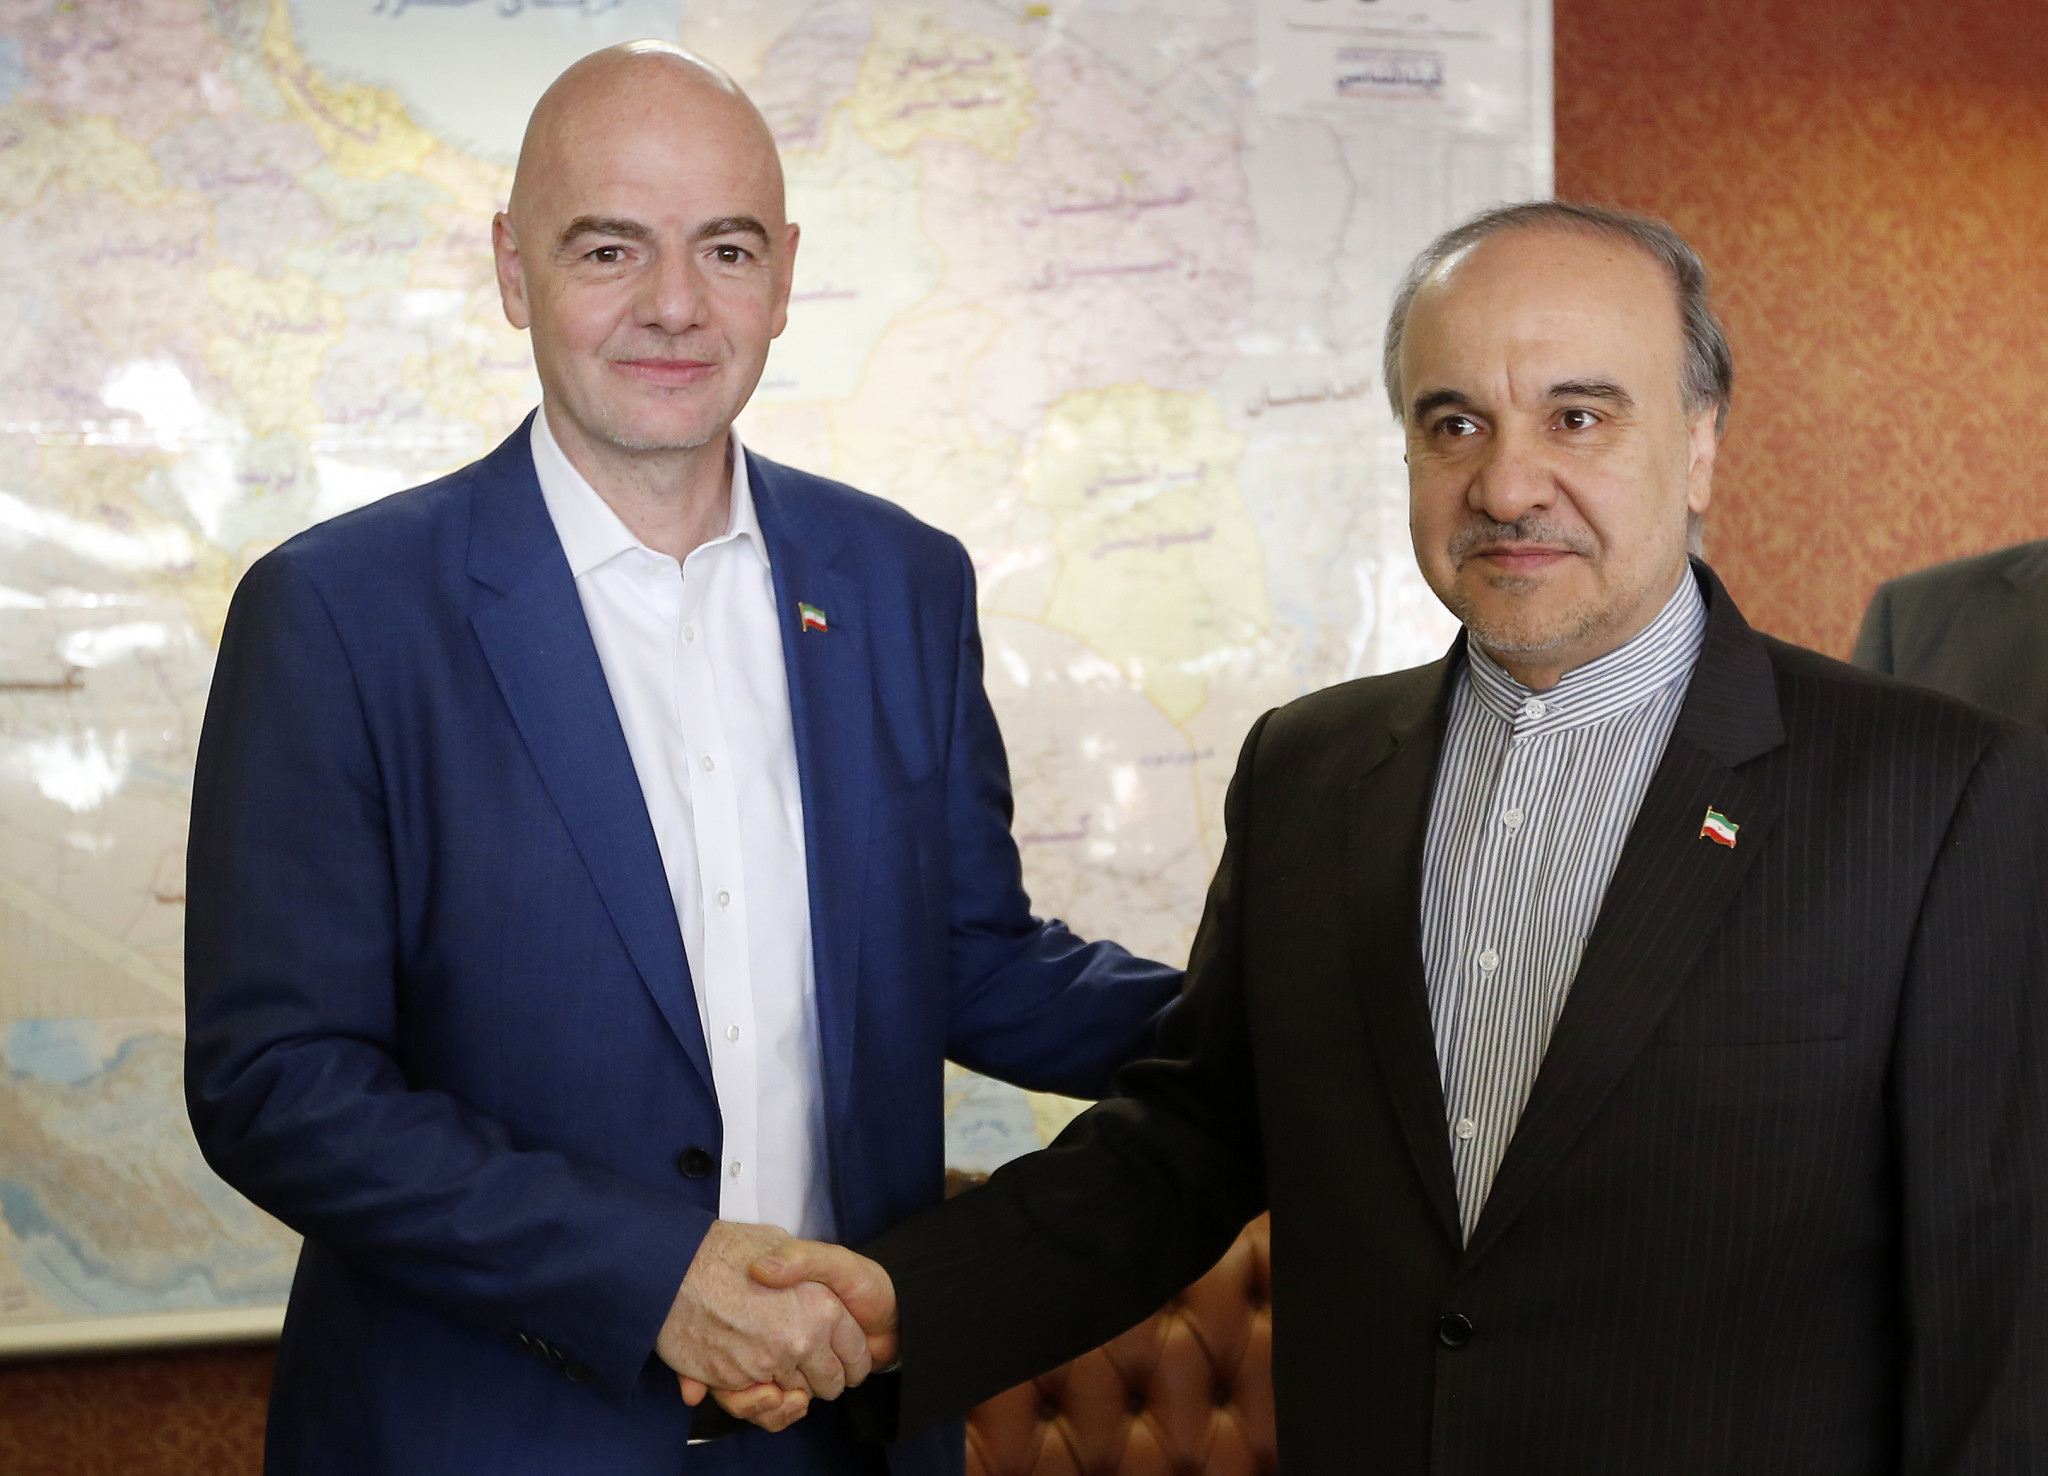 Masoud Soltanifar, Iran's Minister of Youth Affairs and Sports, recently had a meeting with FIFA President Gianni Infantino during the Winter Youth Olympic Games in Lausanne where the upcoming elections were discussed ©Getty Images